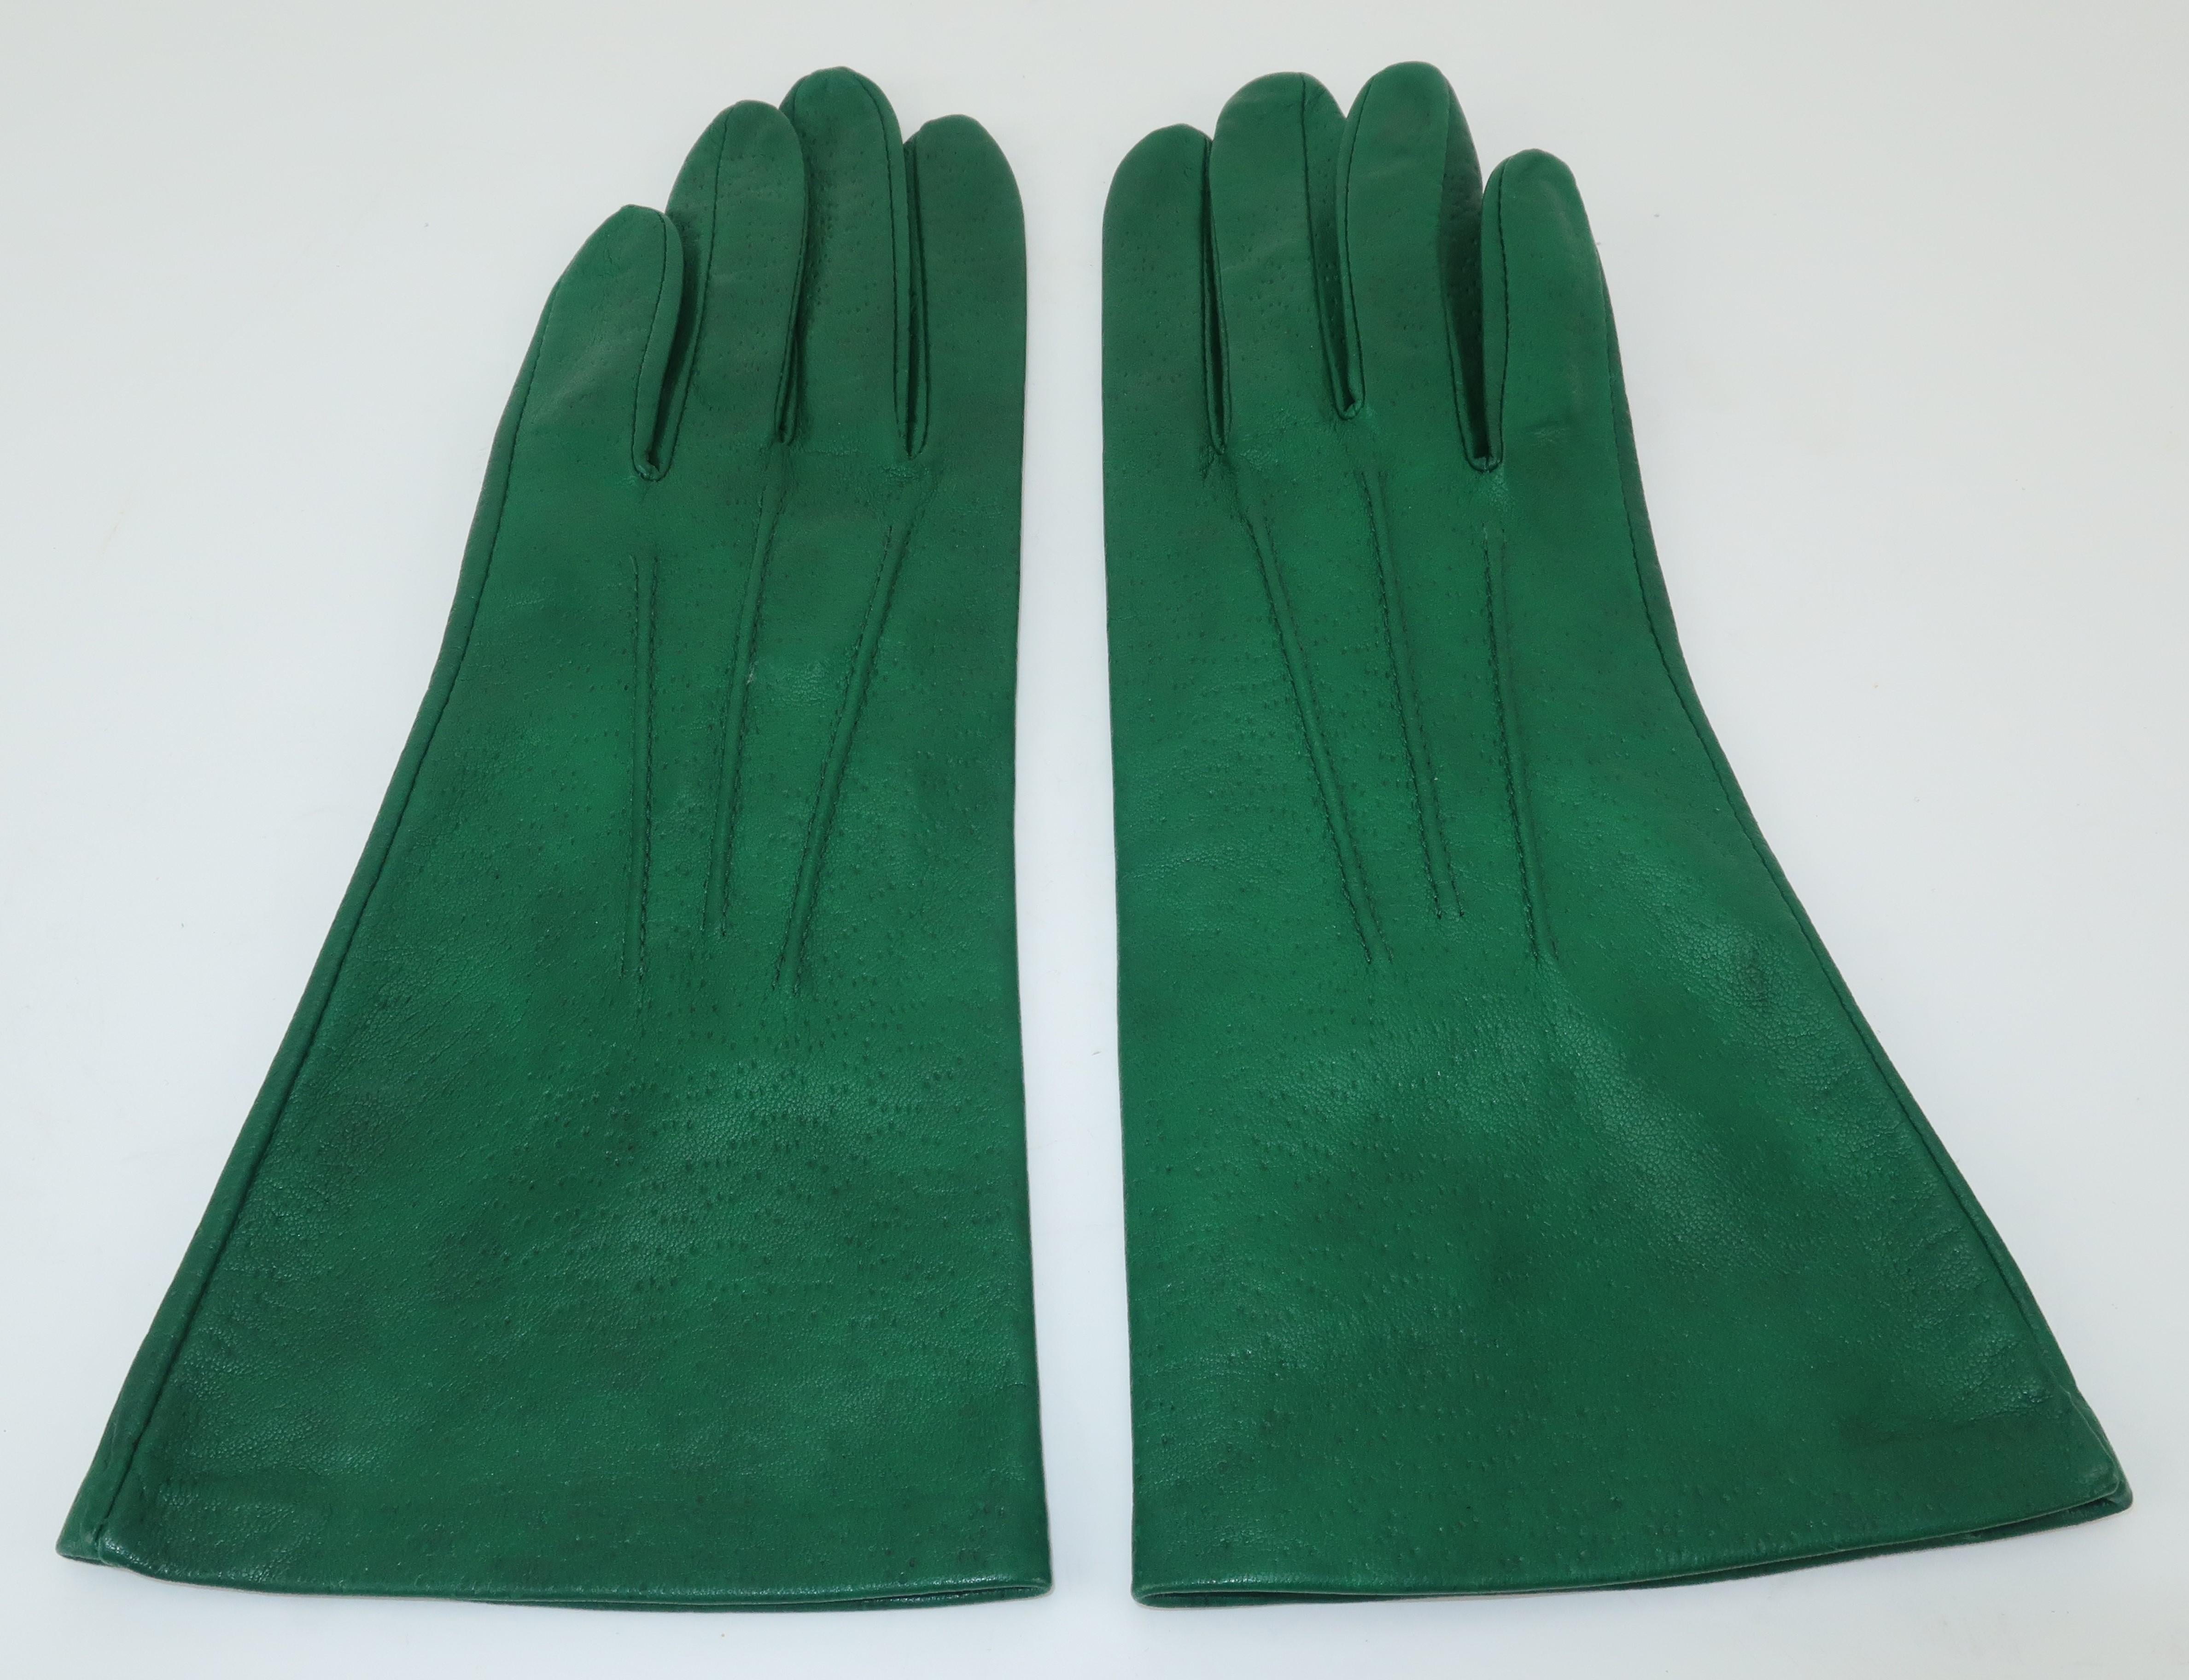 C.1960 Emerald Green Textured Leather Gloves 2